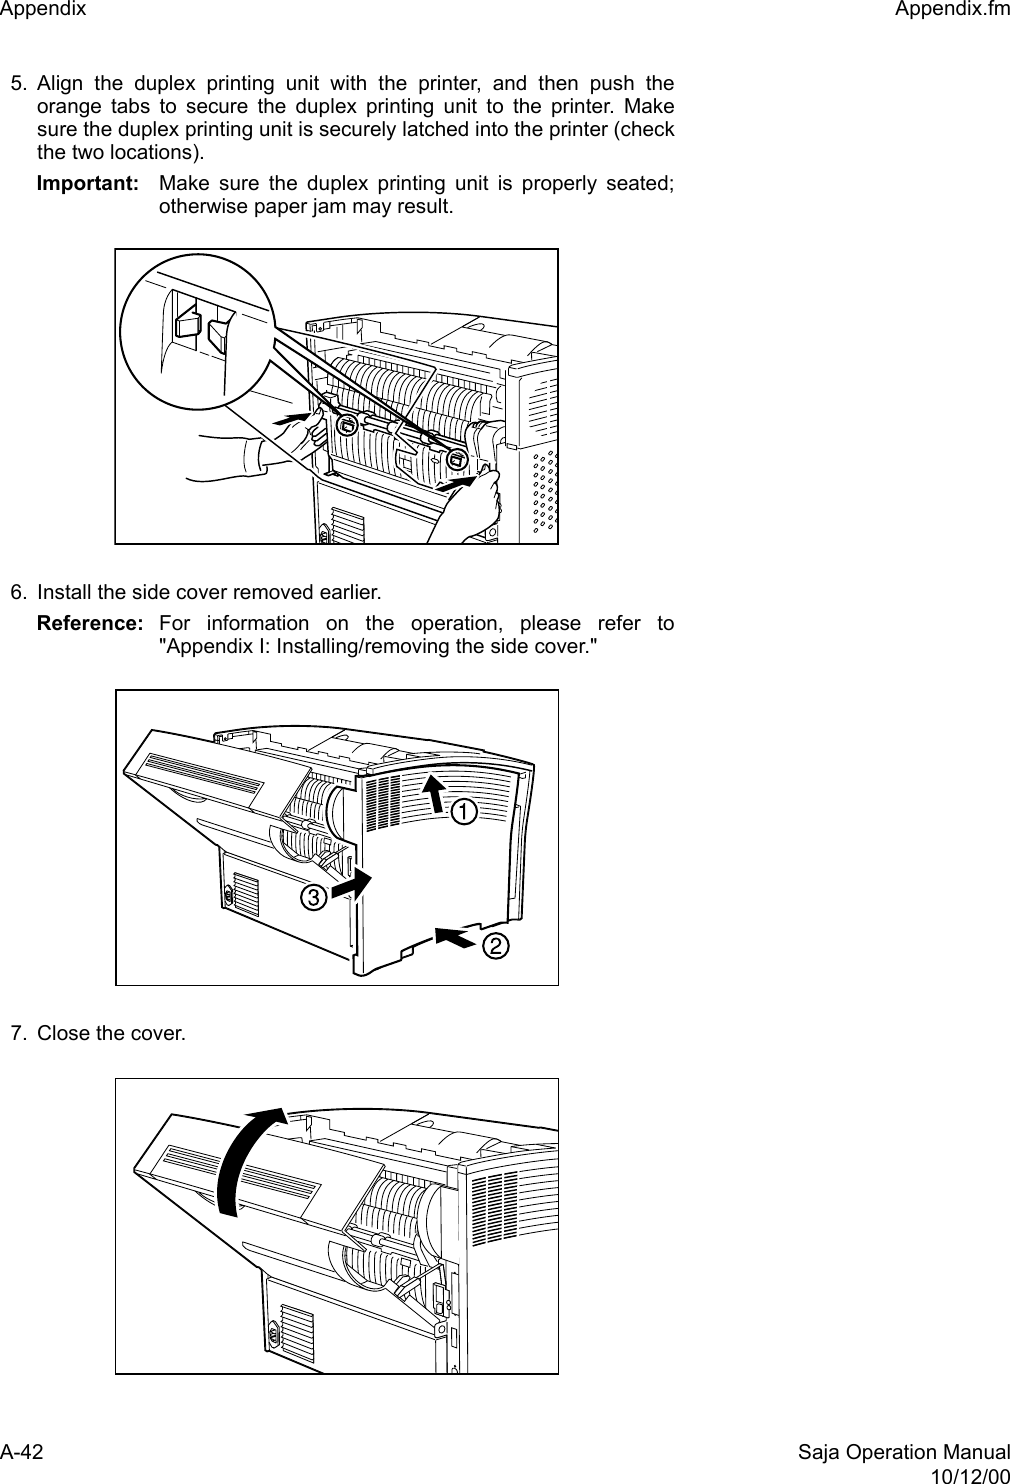 A-42 Saja Operation Manual10/12/00Appendix  Appendix.fm5. Align the duplex printing unit with the printer, and then push theorange tabs to secure the duplex printing unit to the printer. Makesure the duplex printing unit is securely latched into the printer (checkthe two locations).Important: Make sure the duplex printing unit is properly seated;otherwise paper jam may result.6. Install the side cover removed earlier.Reference: For information on the operation, please refer to&quot;Appendix I: Installing/removing the side cover.&quot;7. Close the cover.